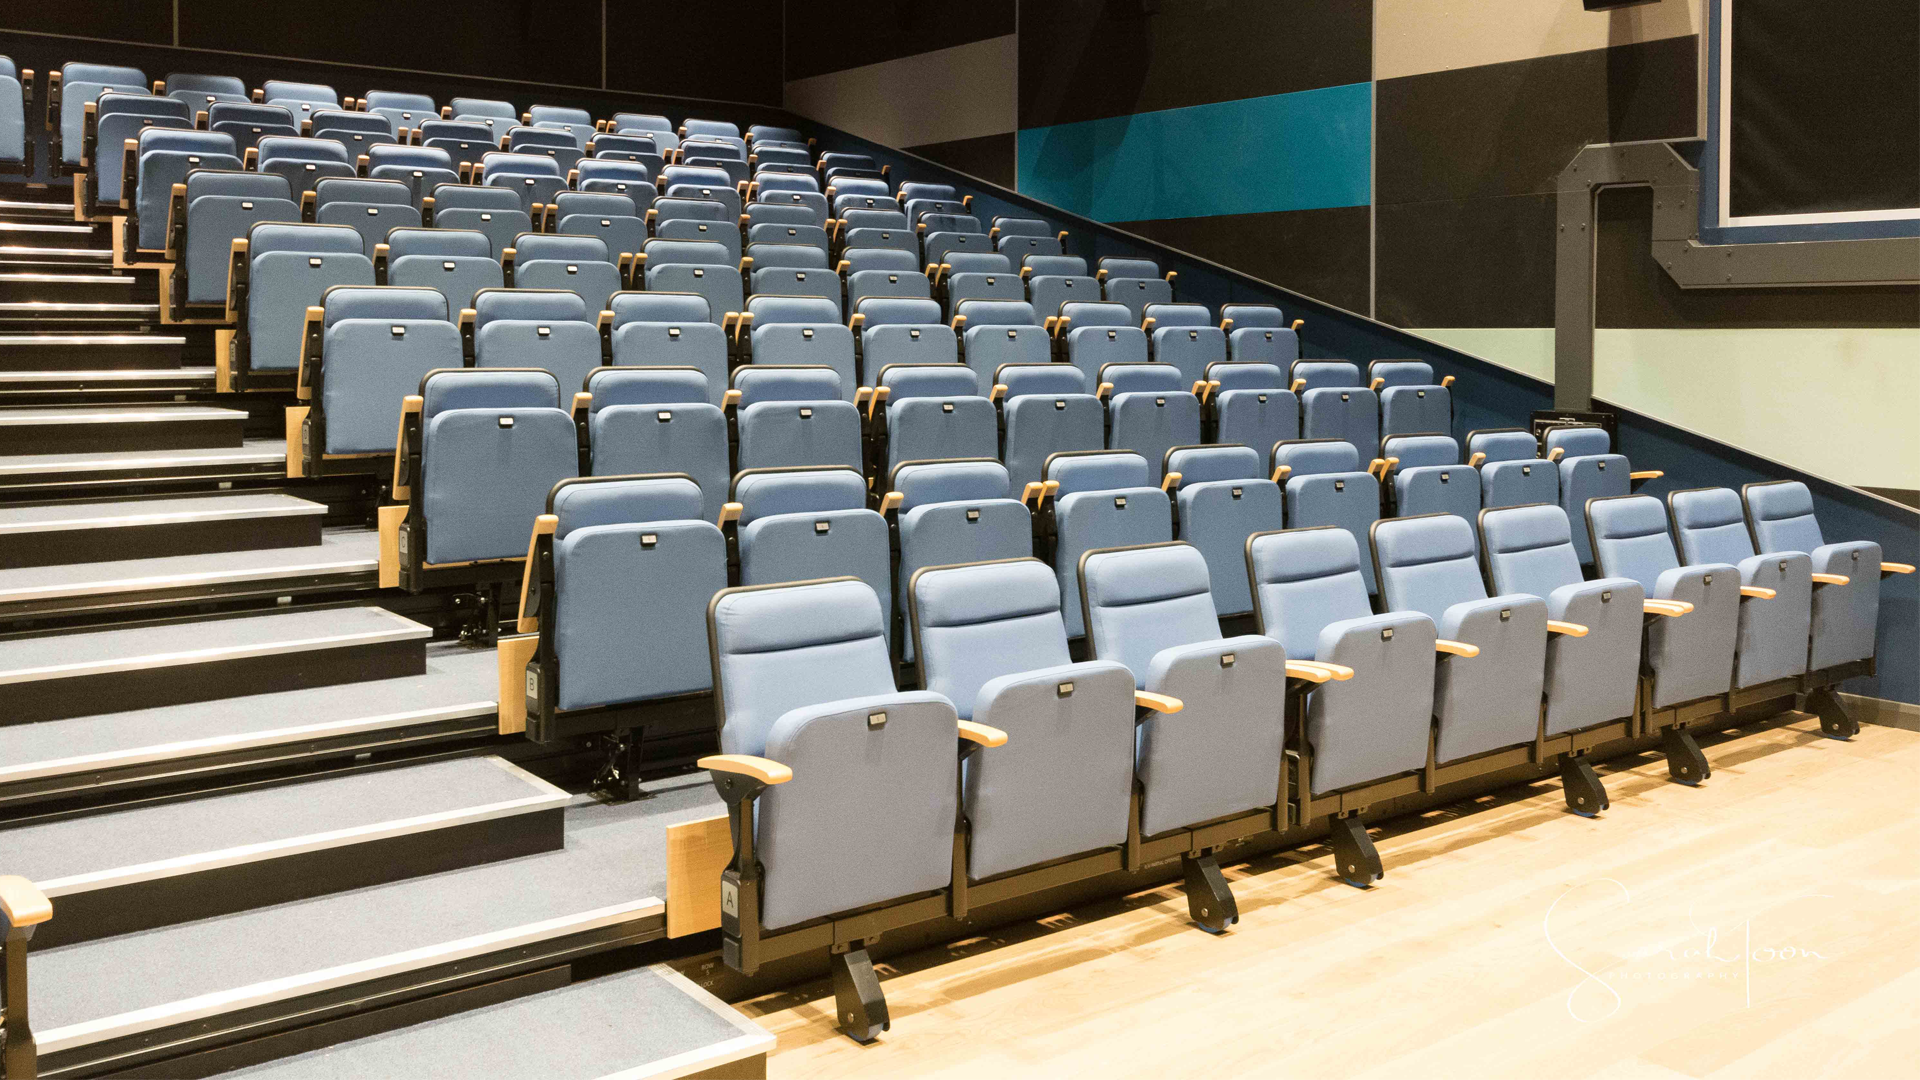 Theatre and Cinema Seating